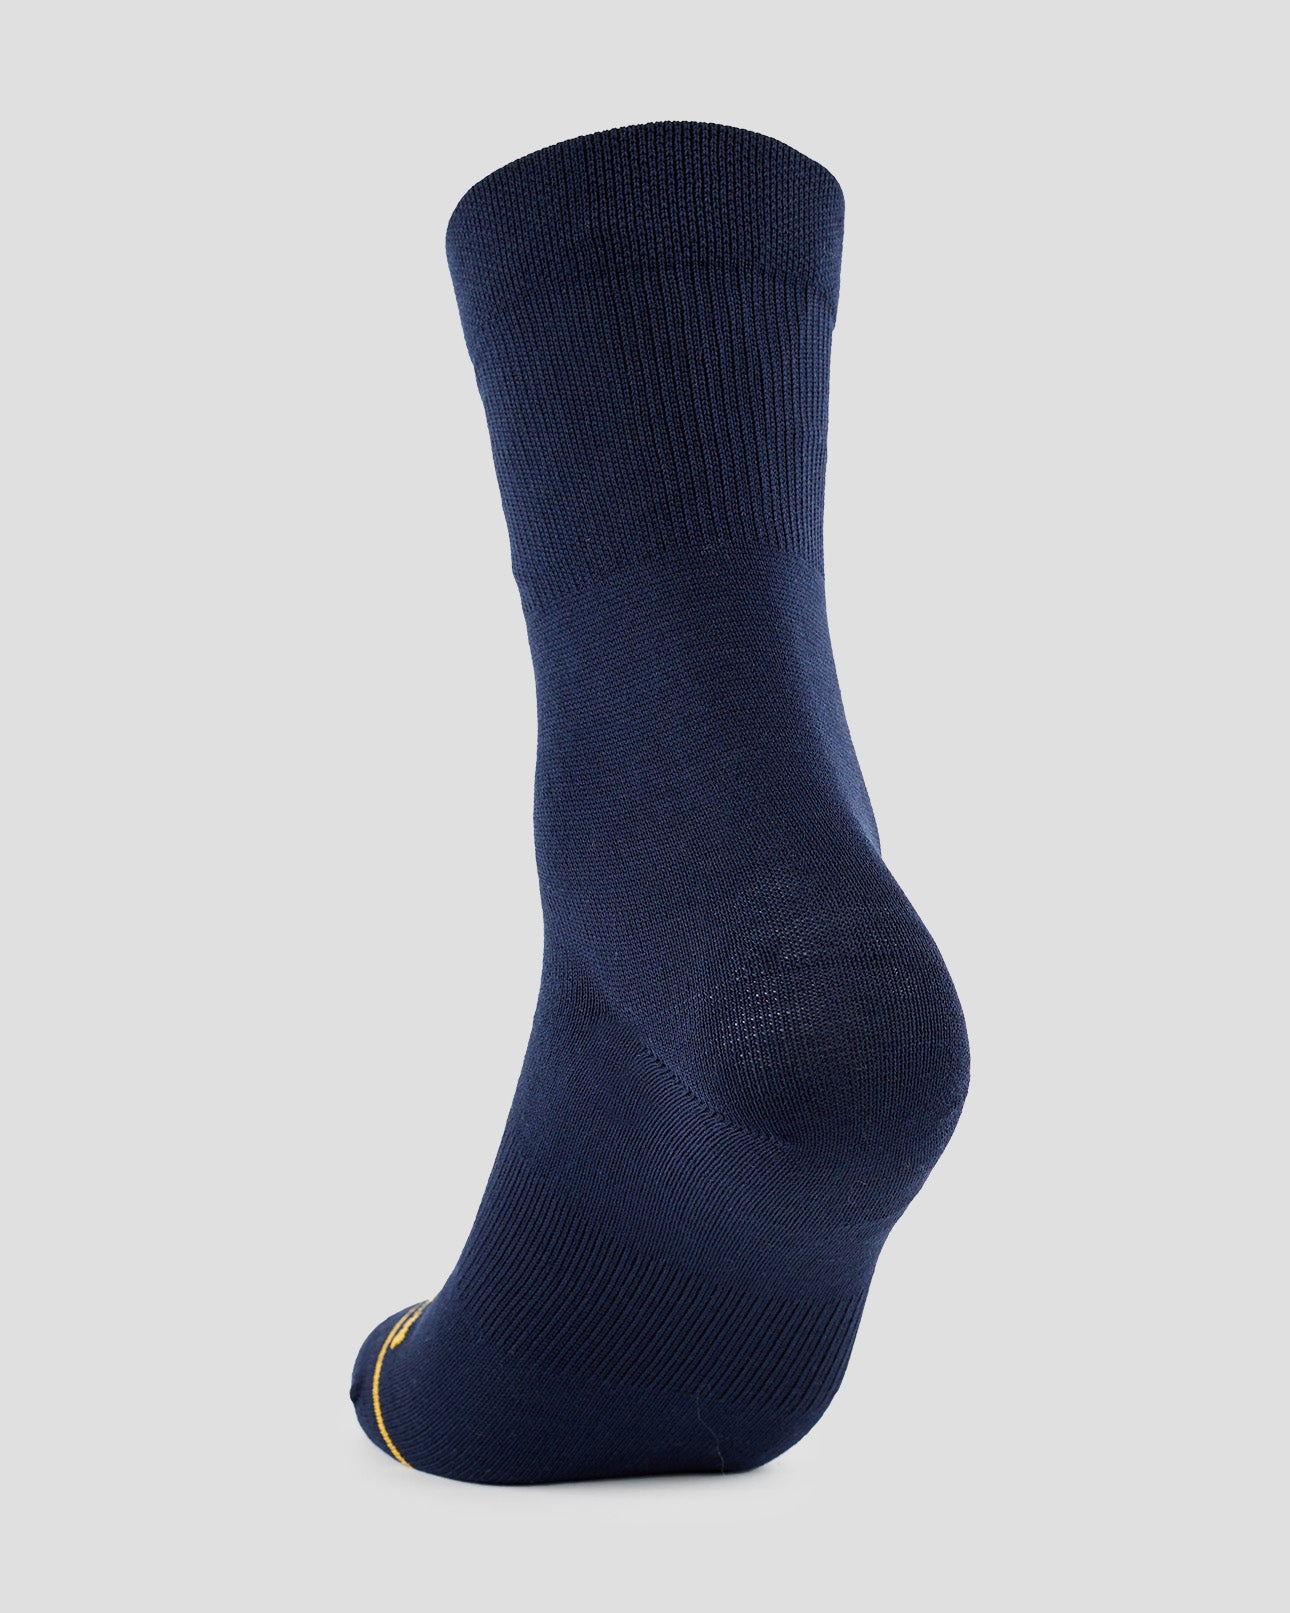 Adults' Midweight Baselayer Socks (2 Pairs) | Color: Navy